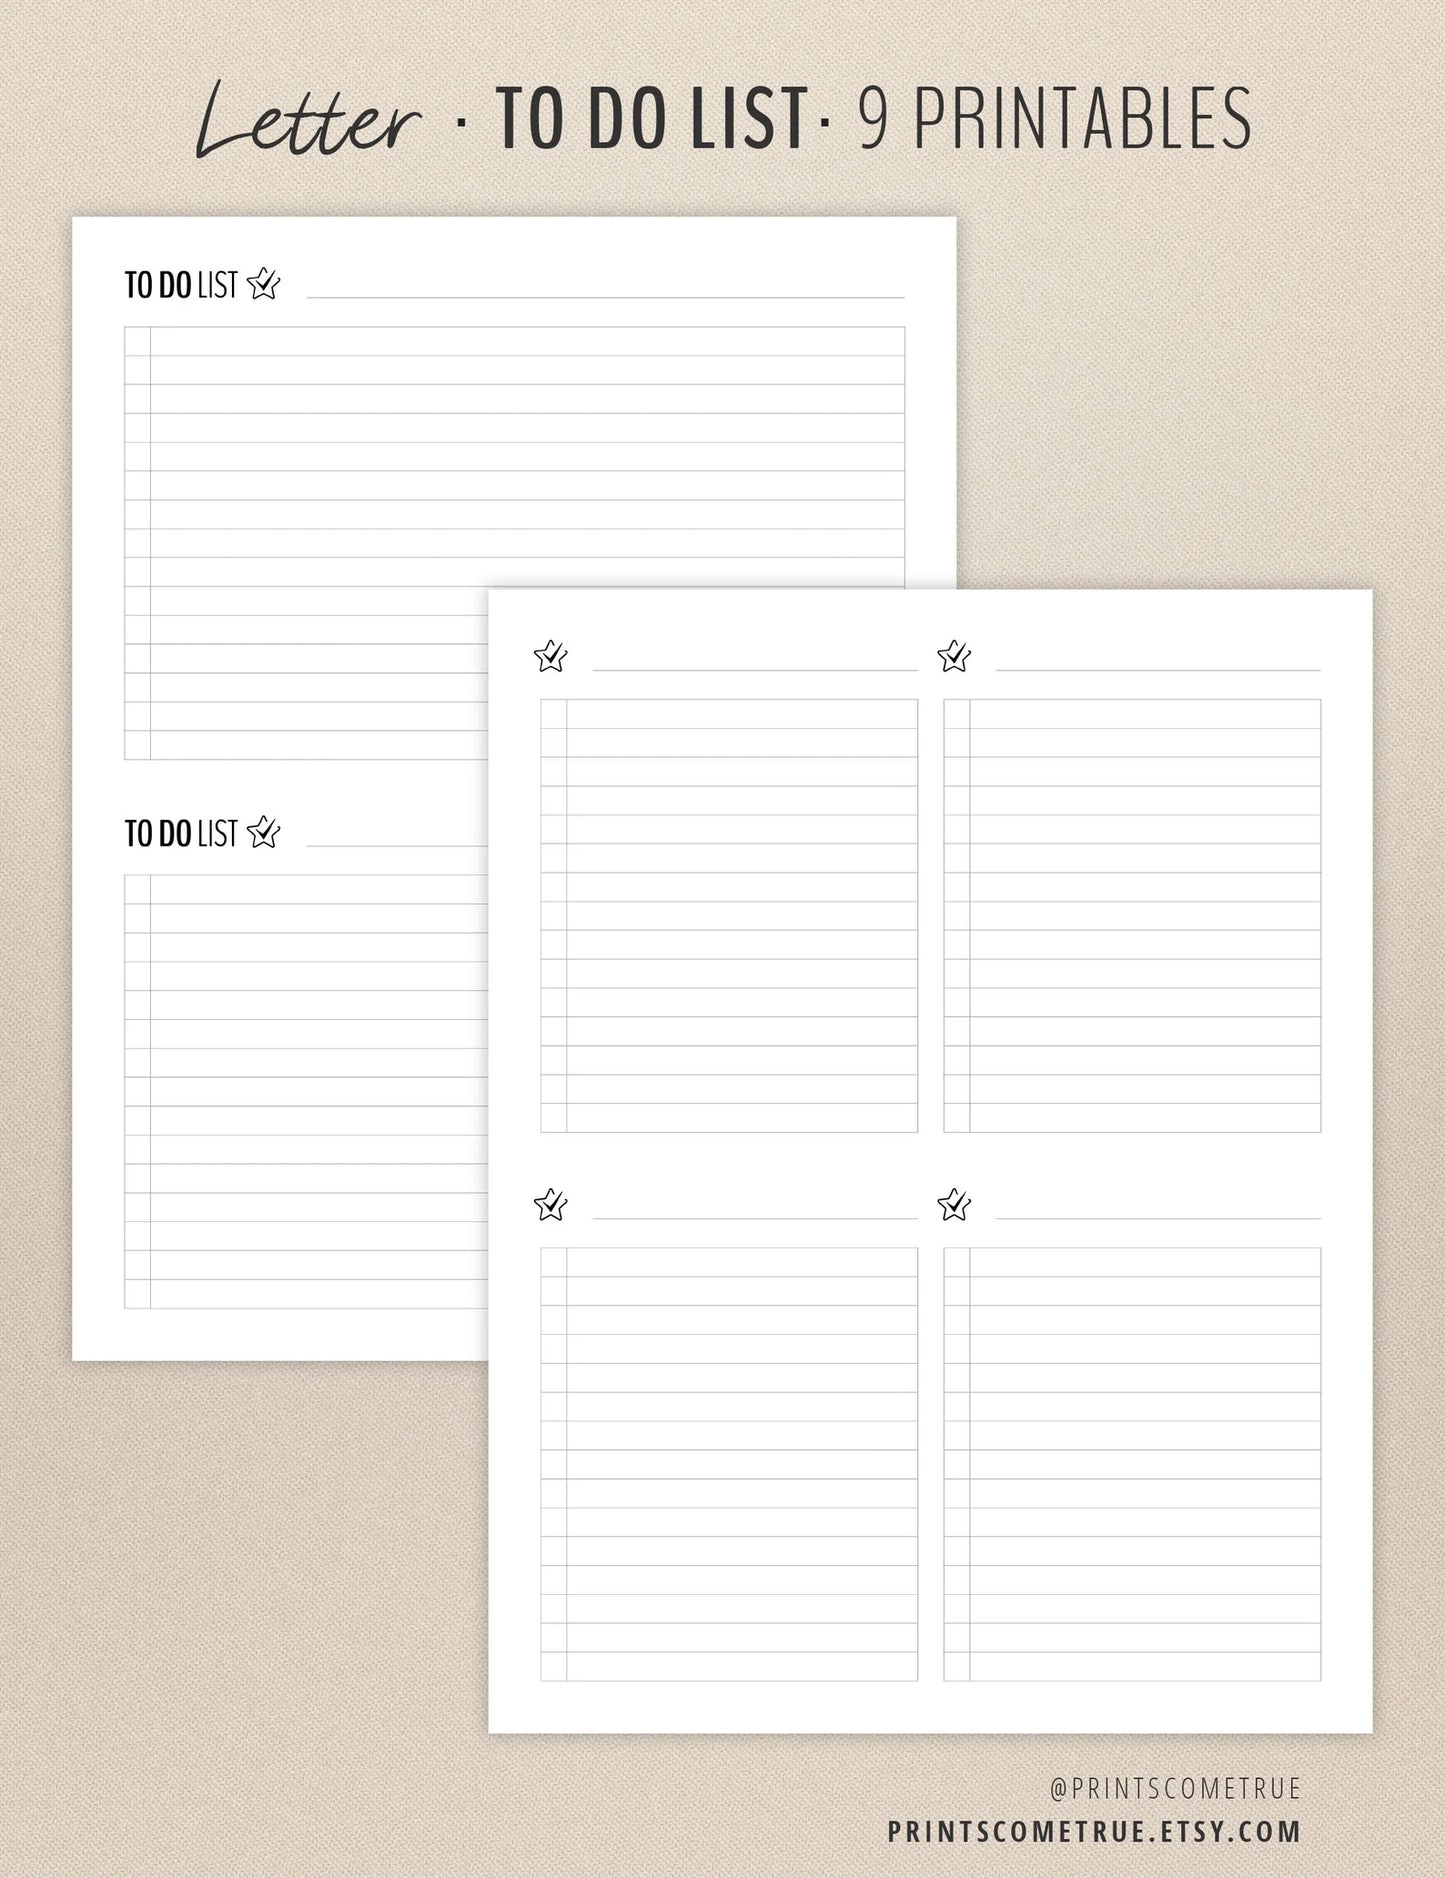 To Do List - Printable Planner Inserts _ letter - 5